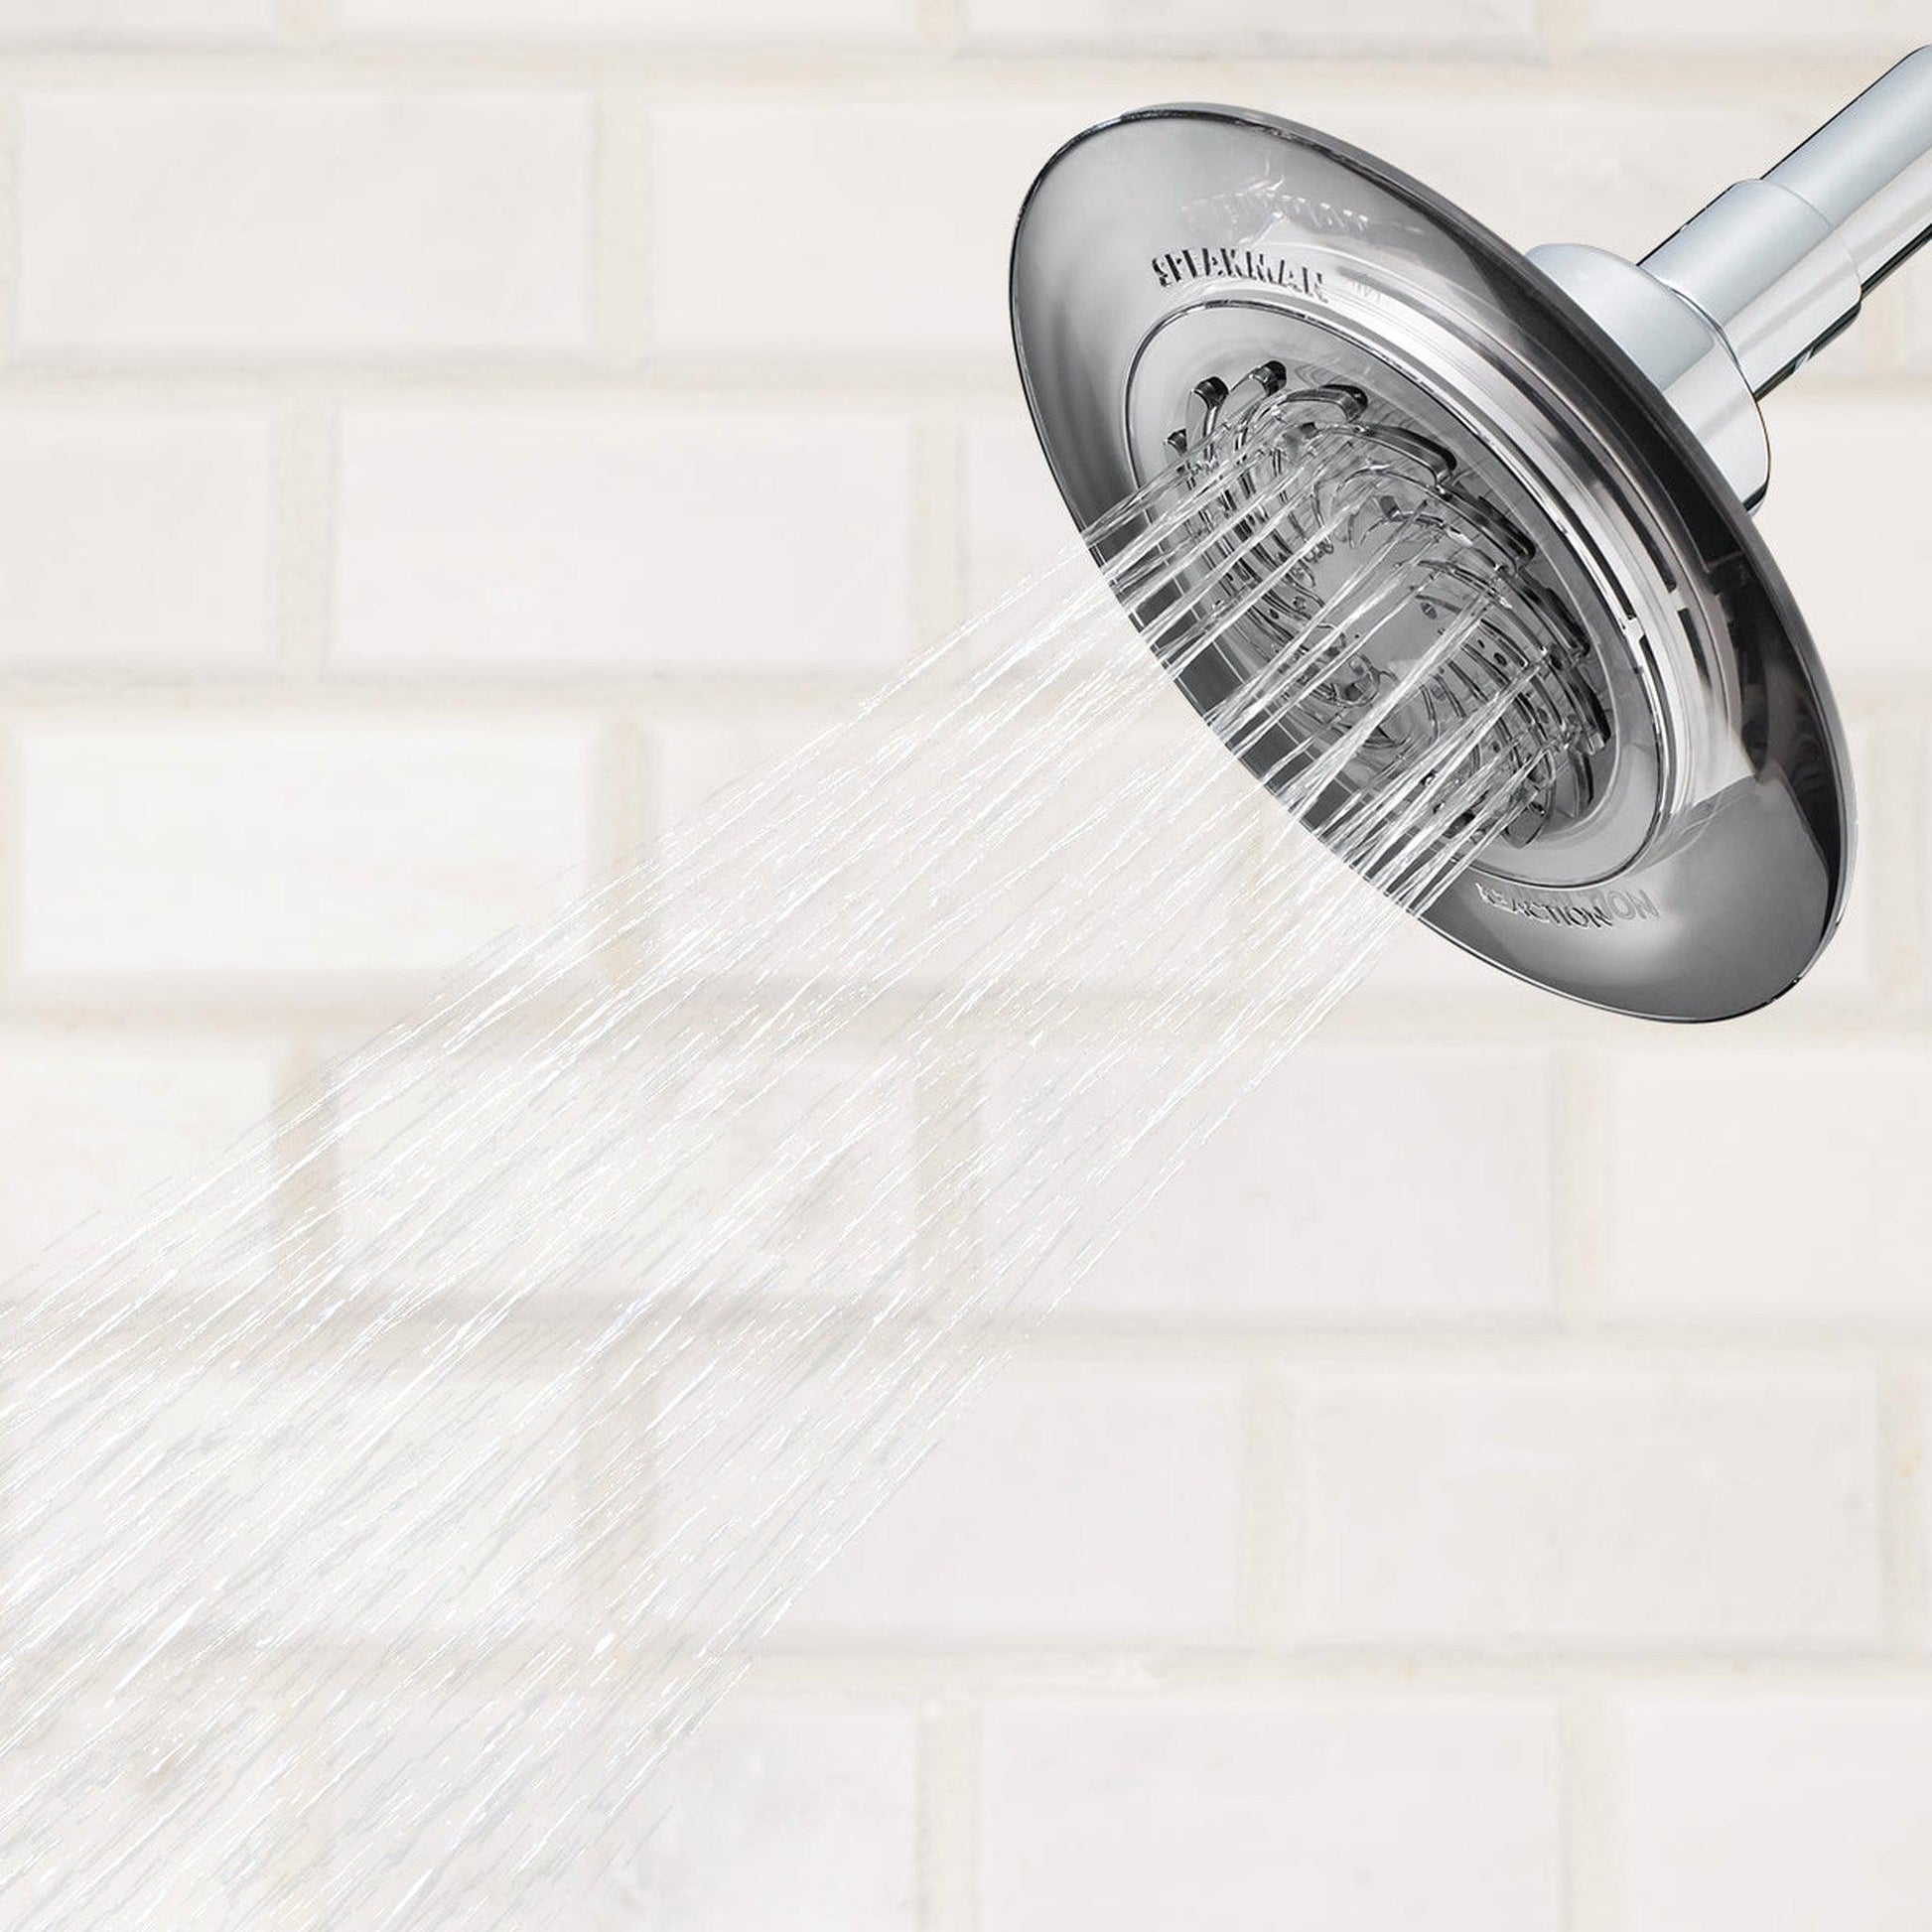 Speakman Reaction Gray and Polished Chrome Single-Function Spray Pattern 2.5 GPM Shower Head